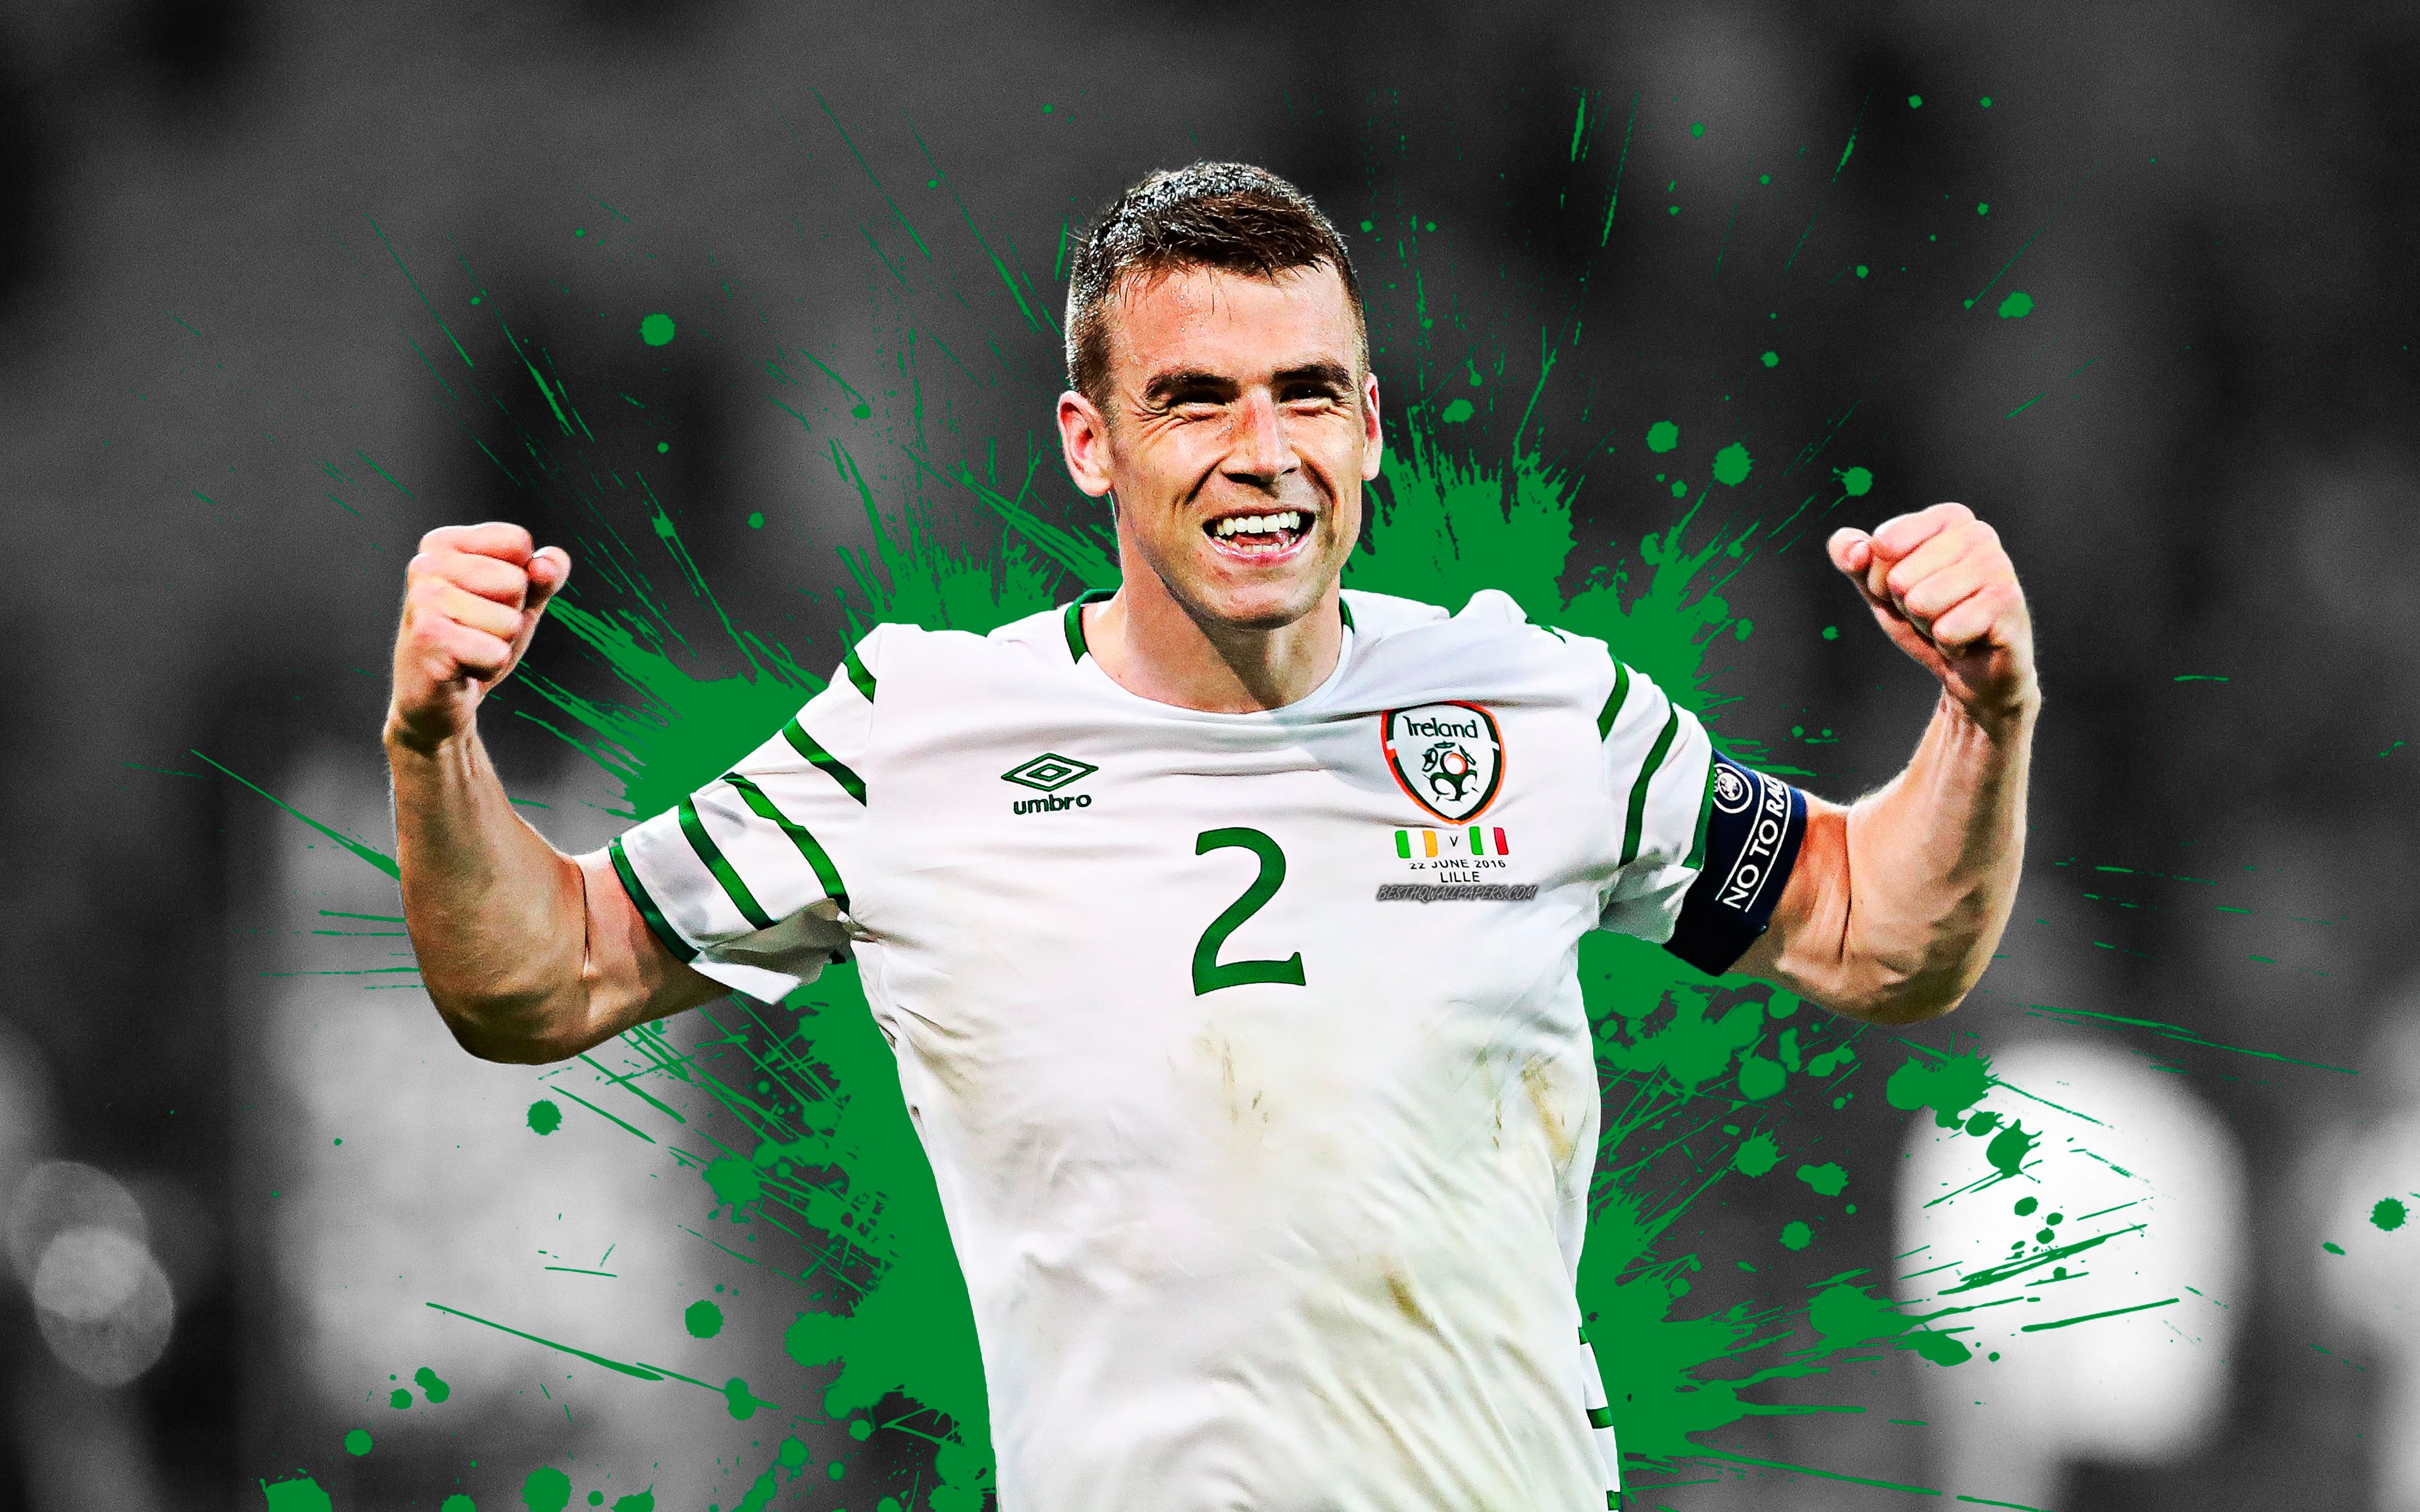 Download wallpaper Seamus Coleman, 4k, Ireland national football team, art, splashes of paint, grunge art, Irish footballer, creative art, Ireland, football for desktop with resolution 3840x2400. High Quality HD picture wallpaper